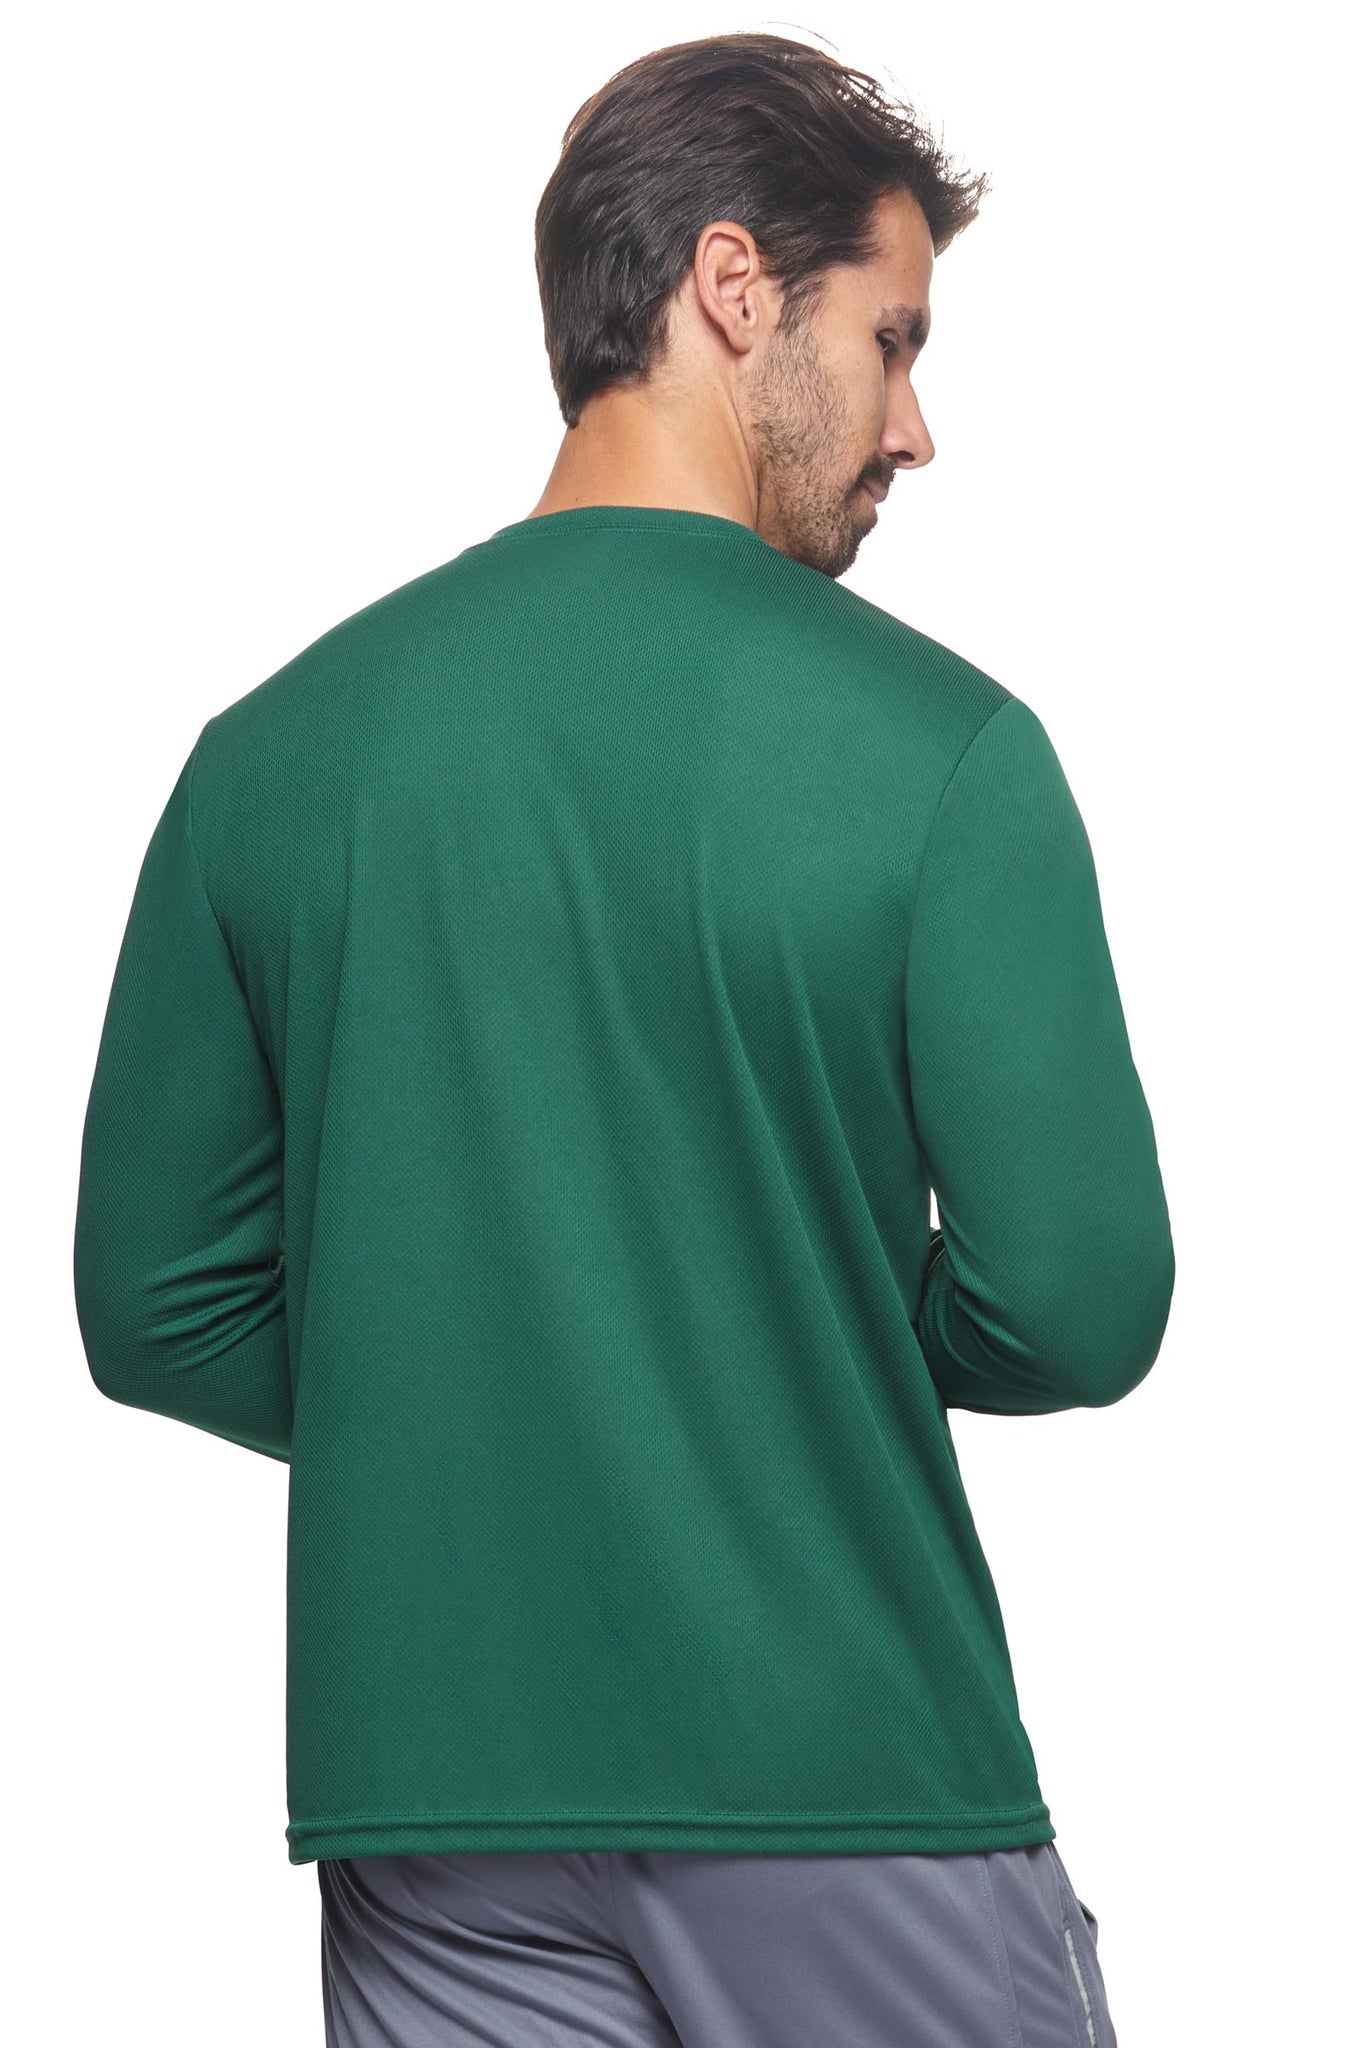 Expert Brand Wholesale Blank Made in USA Men's Long Sleeve Performance Fitness Running Tee Oxymesh™ Tec  in forest green image 4#forest-green